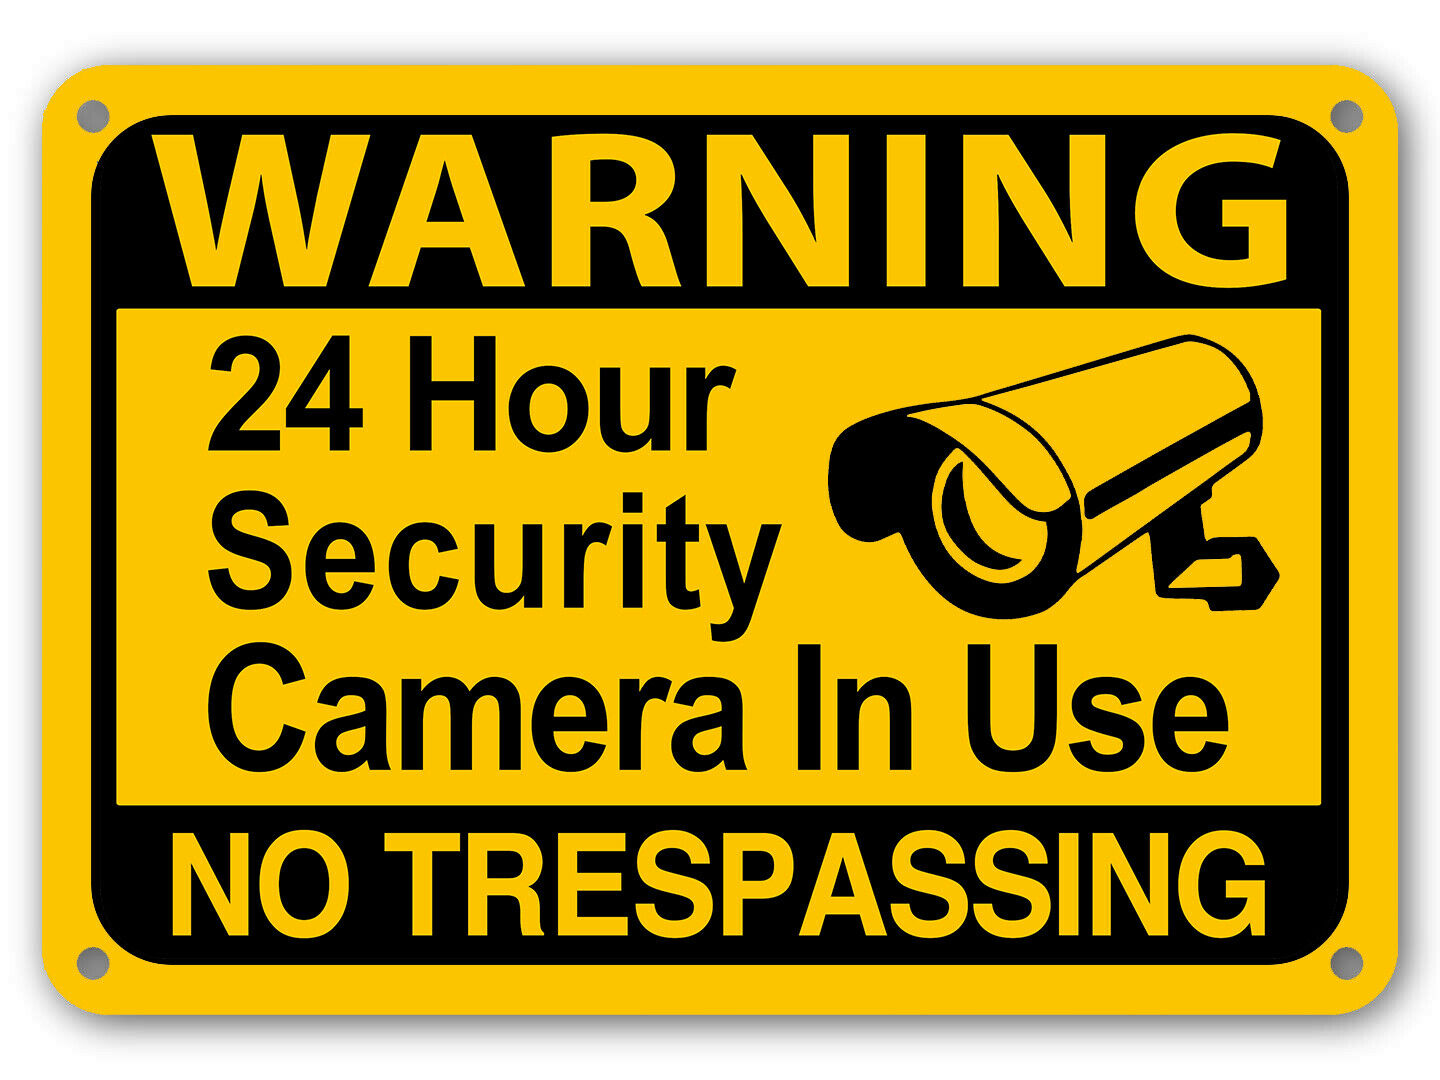 Yellow Warning 24 Hour Video Surveillance No Trespassing Home Security Cctv Sign